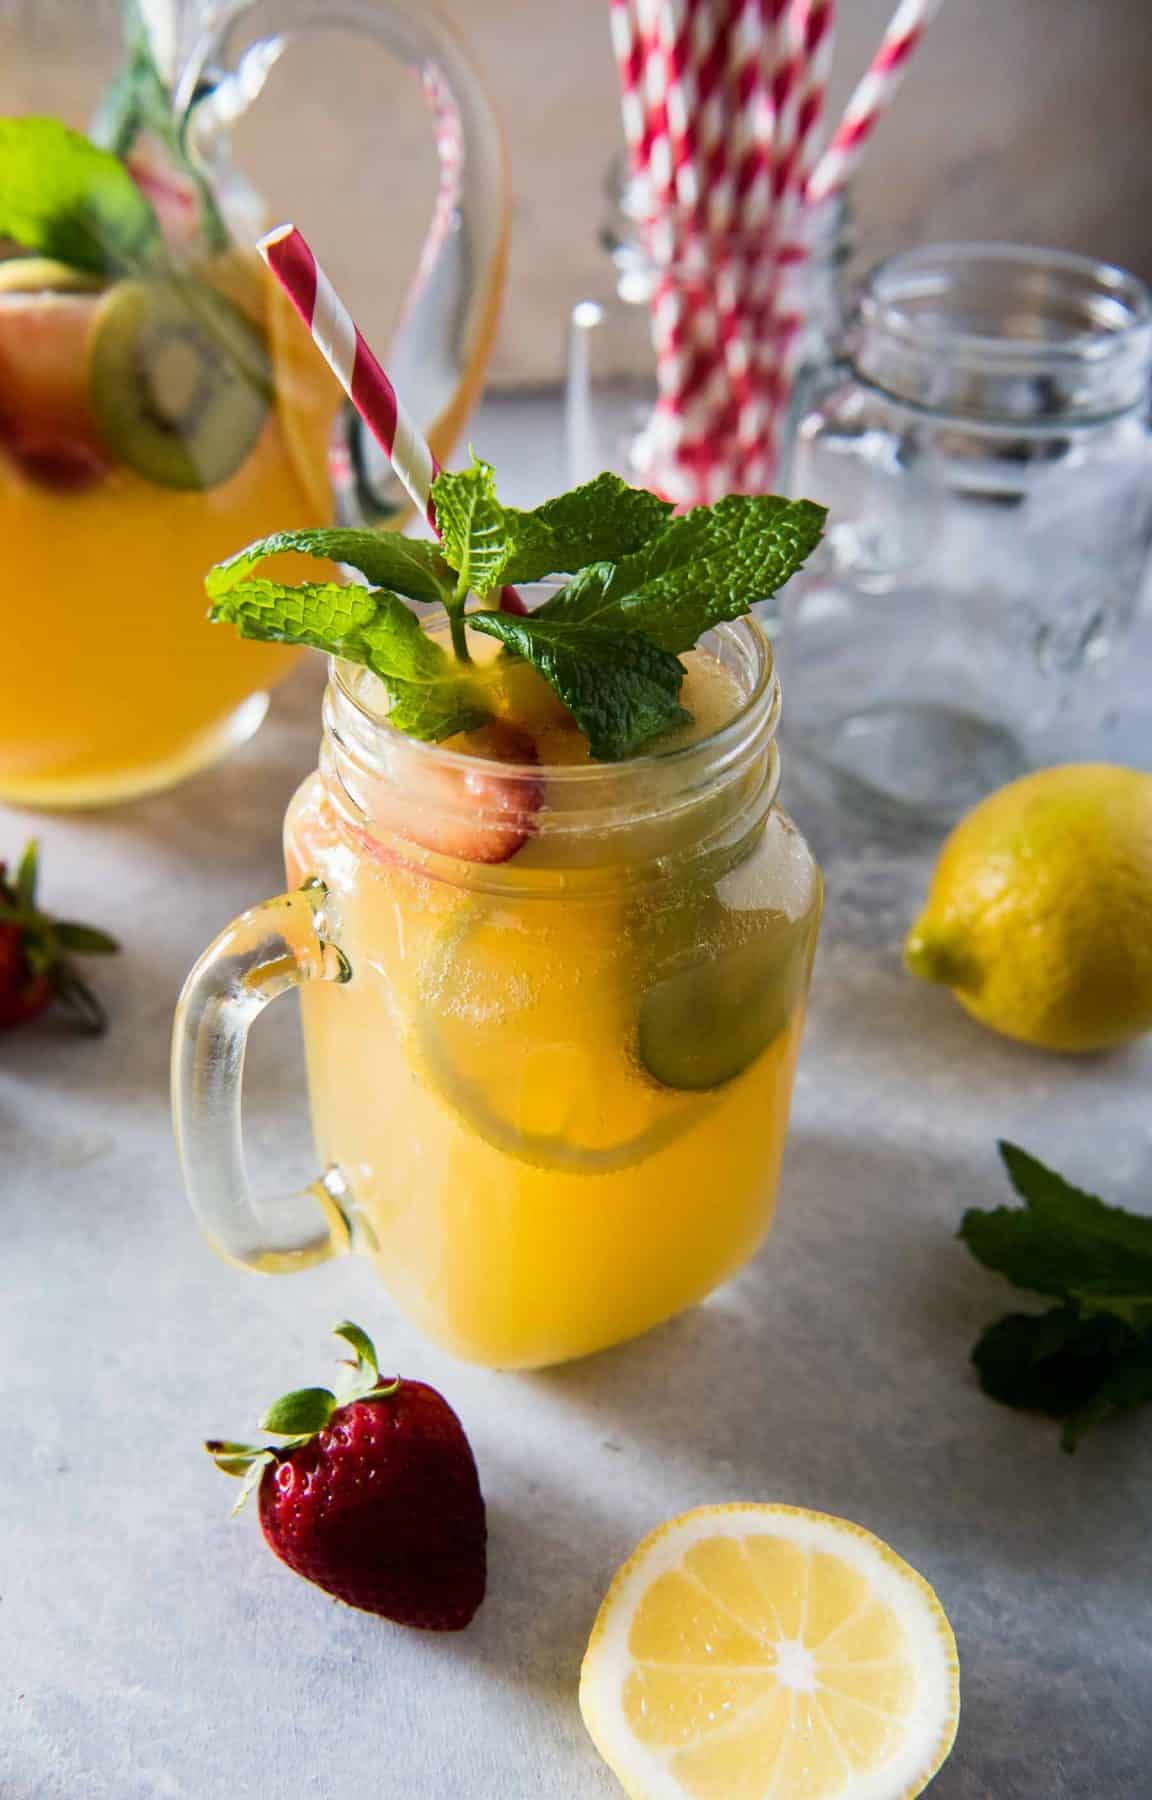  Cool down these hot summer days with a pitcher of Orange Lemonade Twist Punch! Fizzy, spicy, and fruity, this refreshing drink is sure to wow your friends & family!